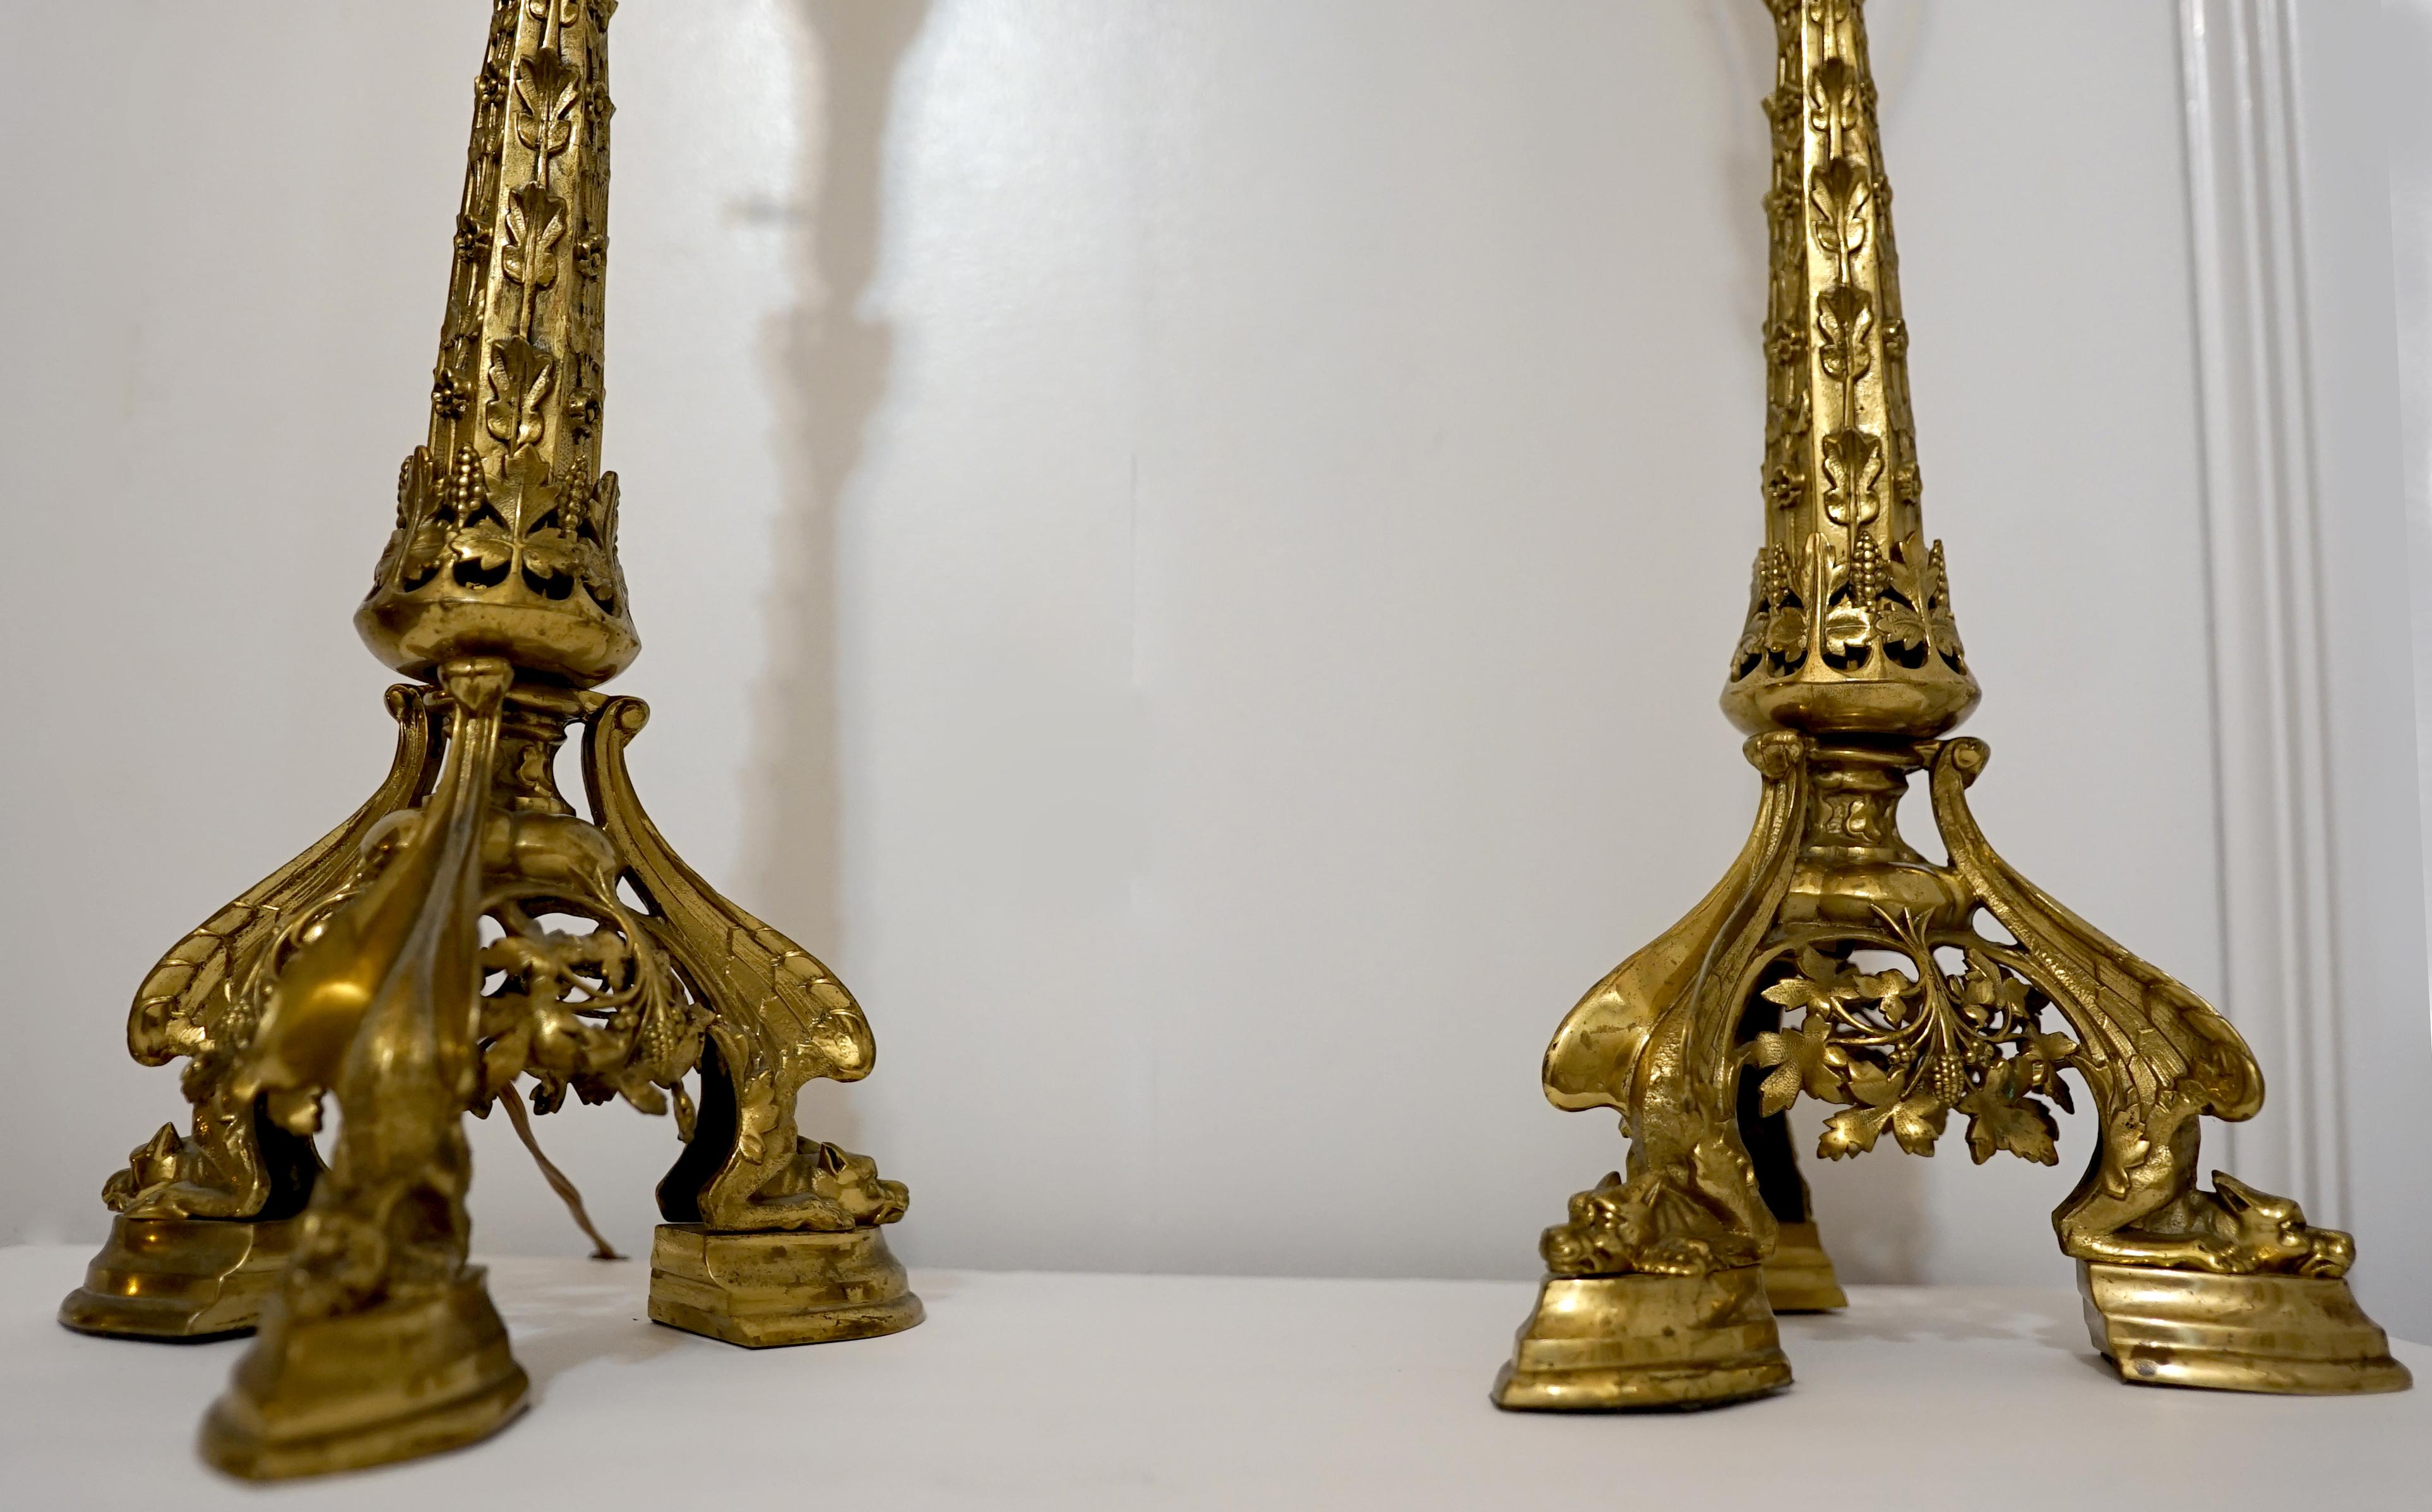 Pair of Cast Gilt Gargoyle Tower Bronze or Brass Table Lamps with Shades For Sale 6